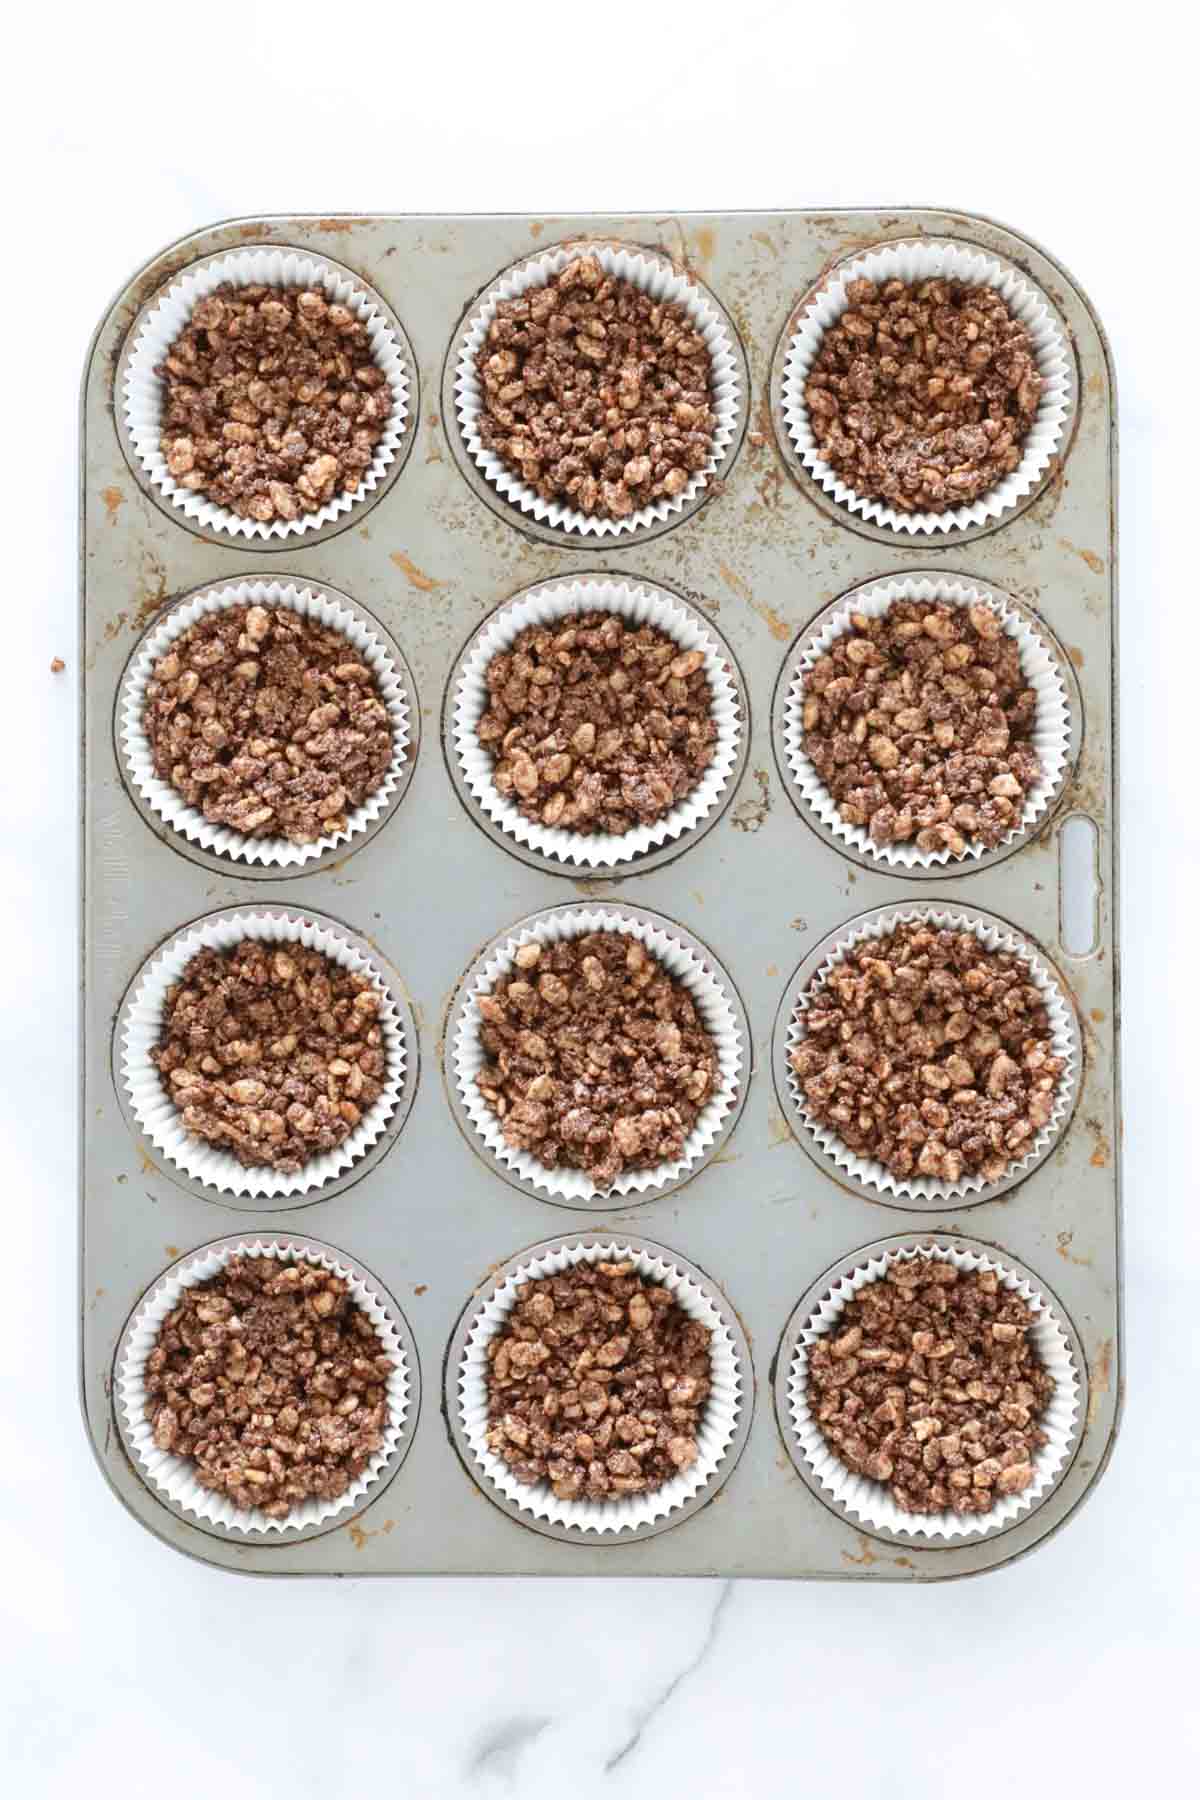 Chocolate crackles in a muffin tin.